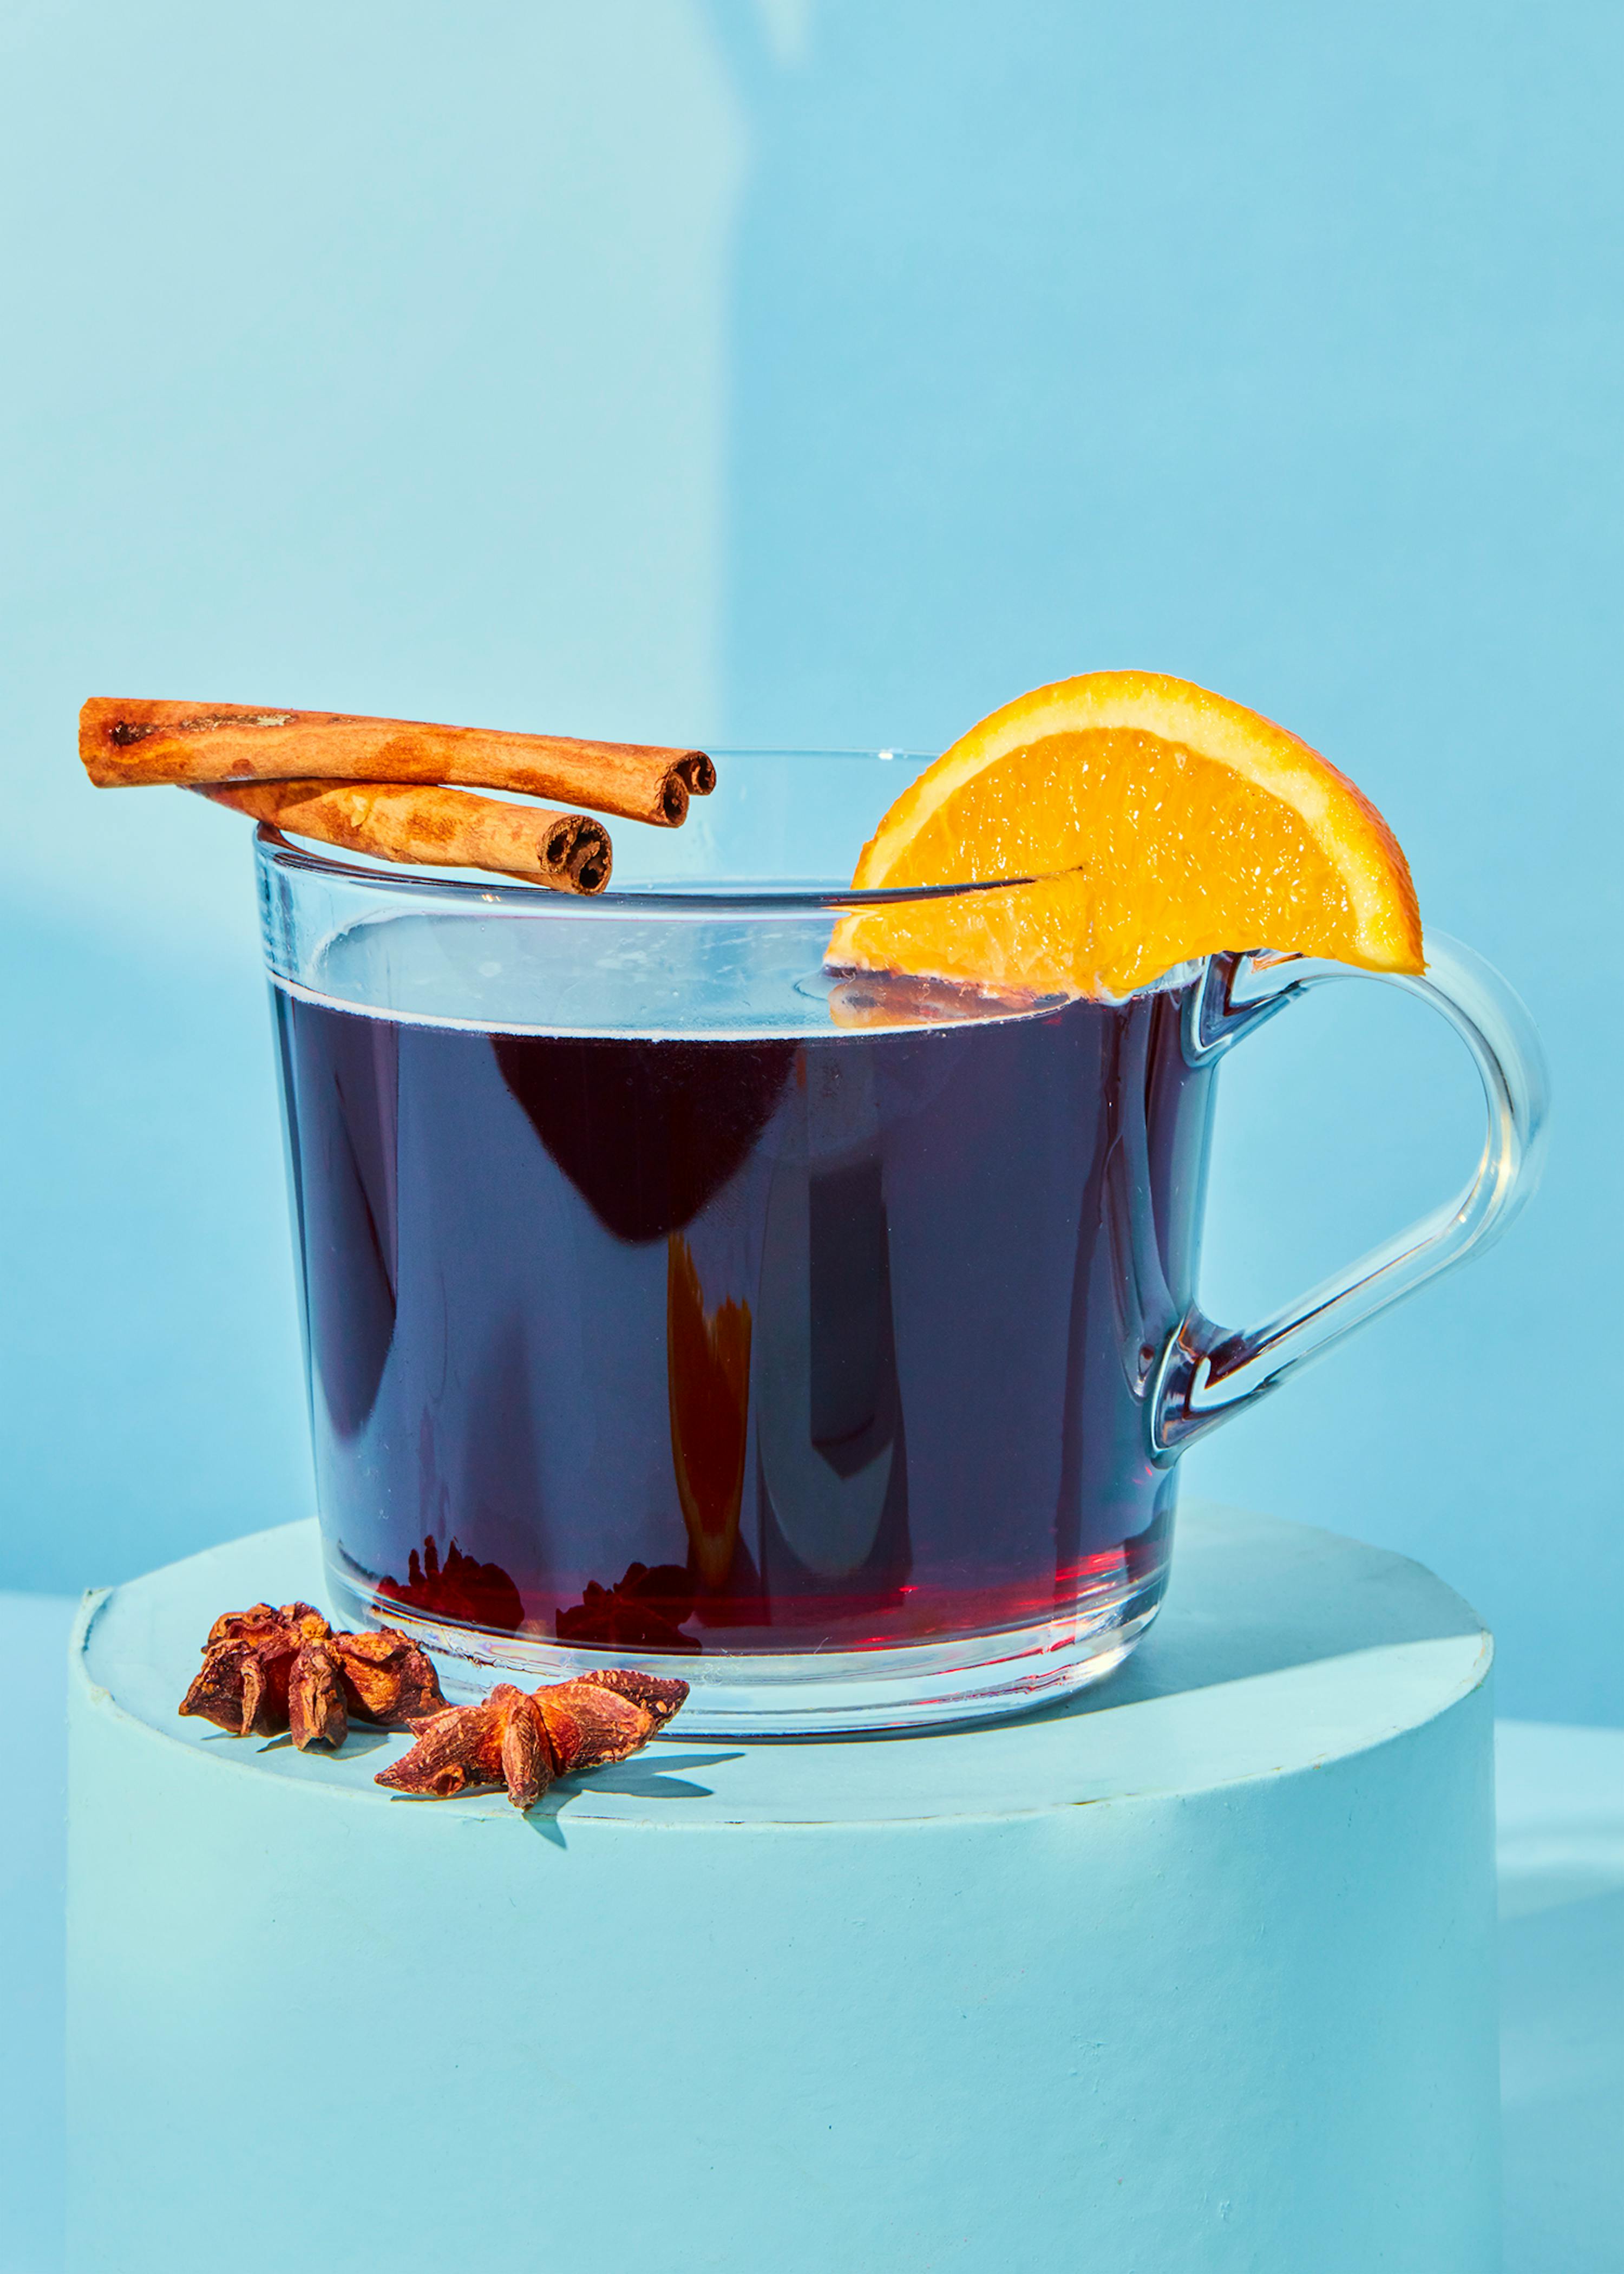 Prinz mulled wine 10l canister